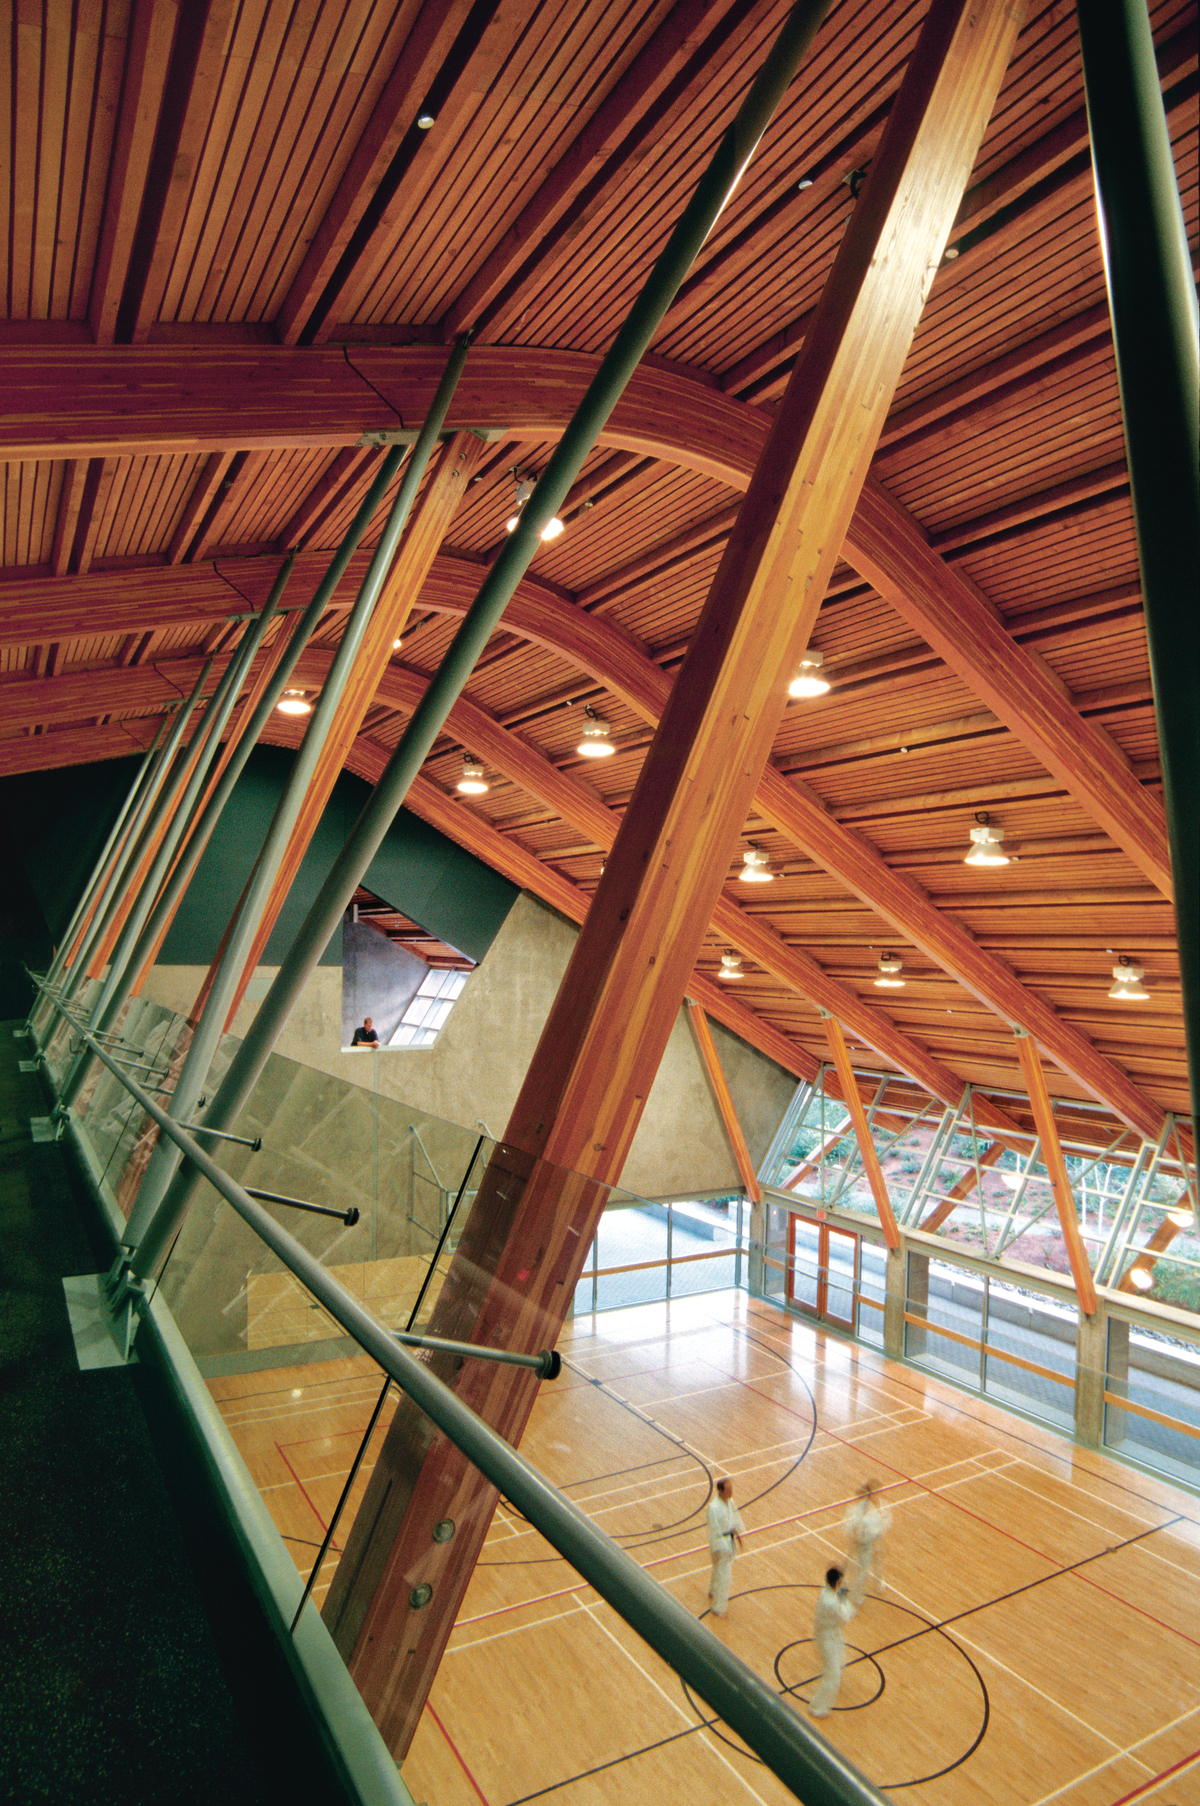 Interior daytime view of low rise Gleneagles Community Centre showing four story main gymnasium, including a huge shed-like roof composed of prefabricated wood panels, supported by Douglas-fir glue-laminated timber beams